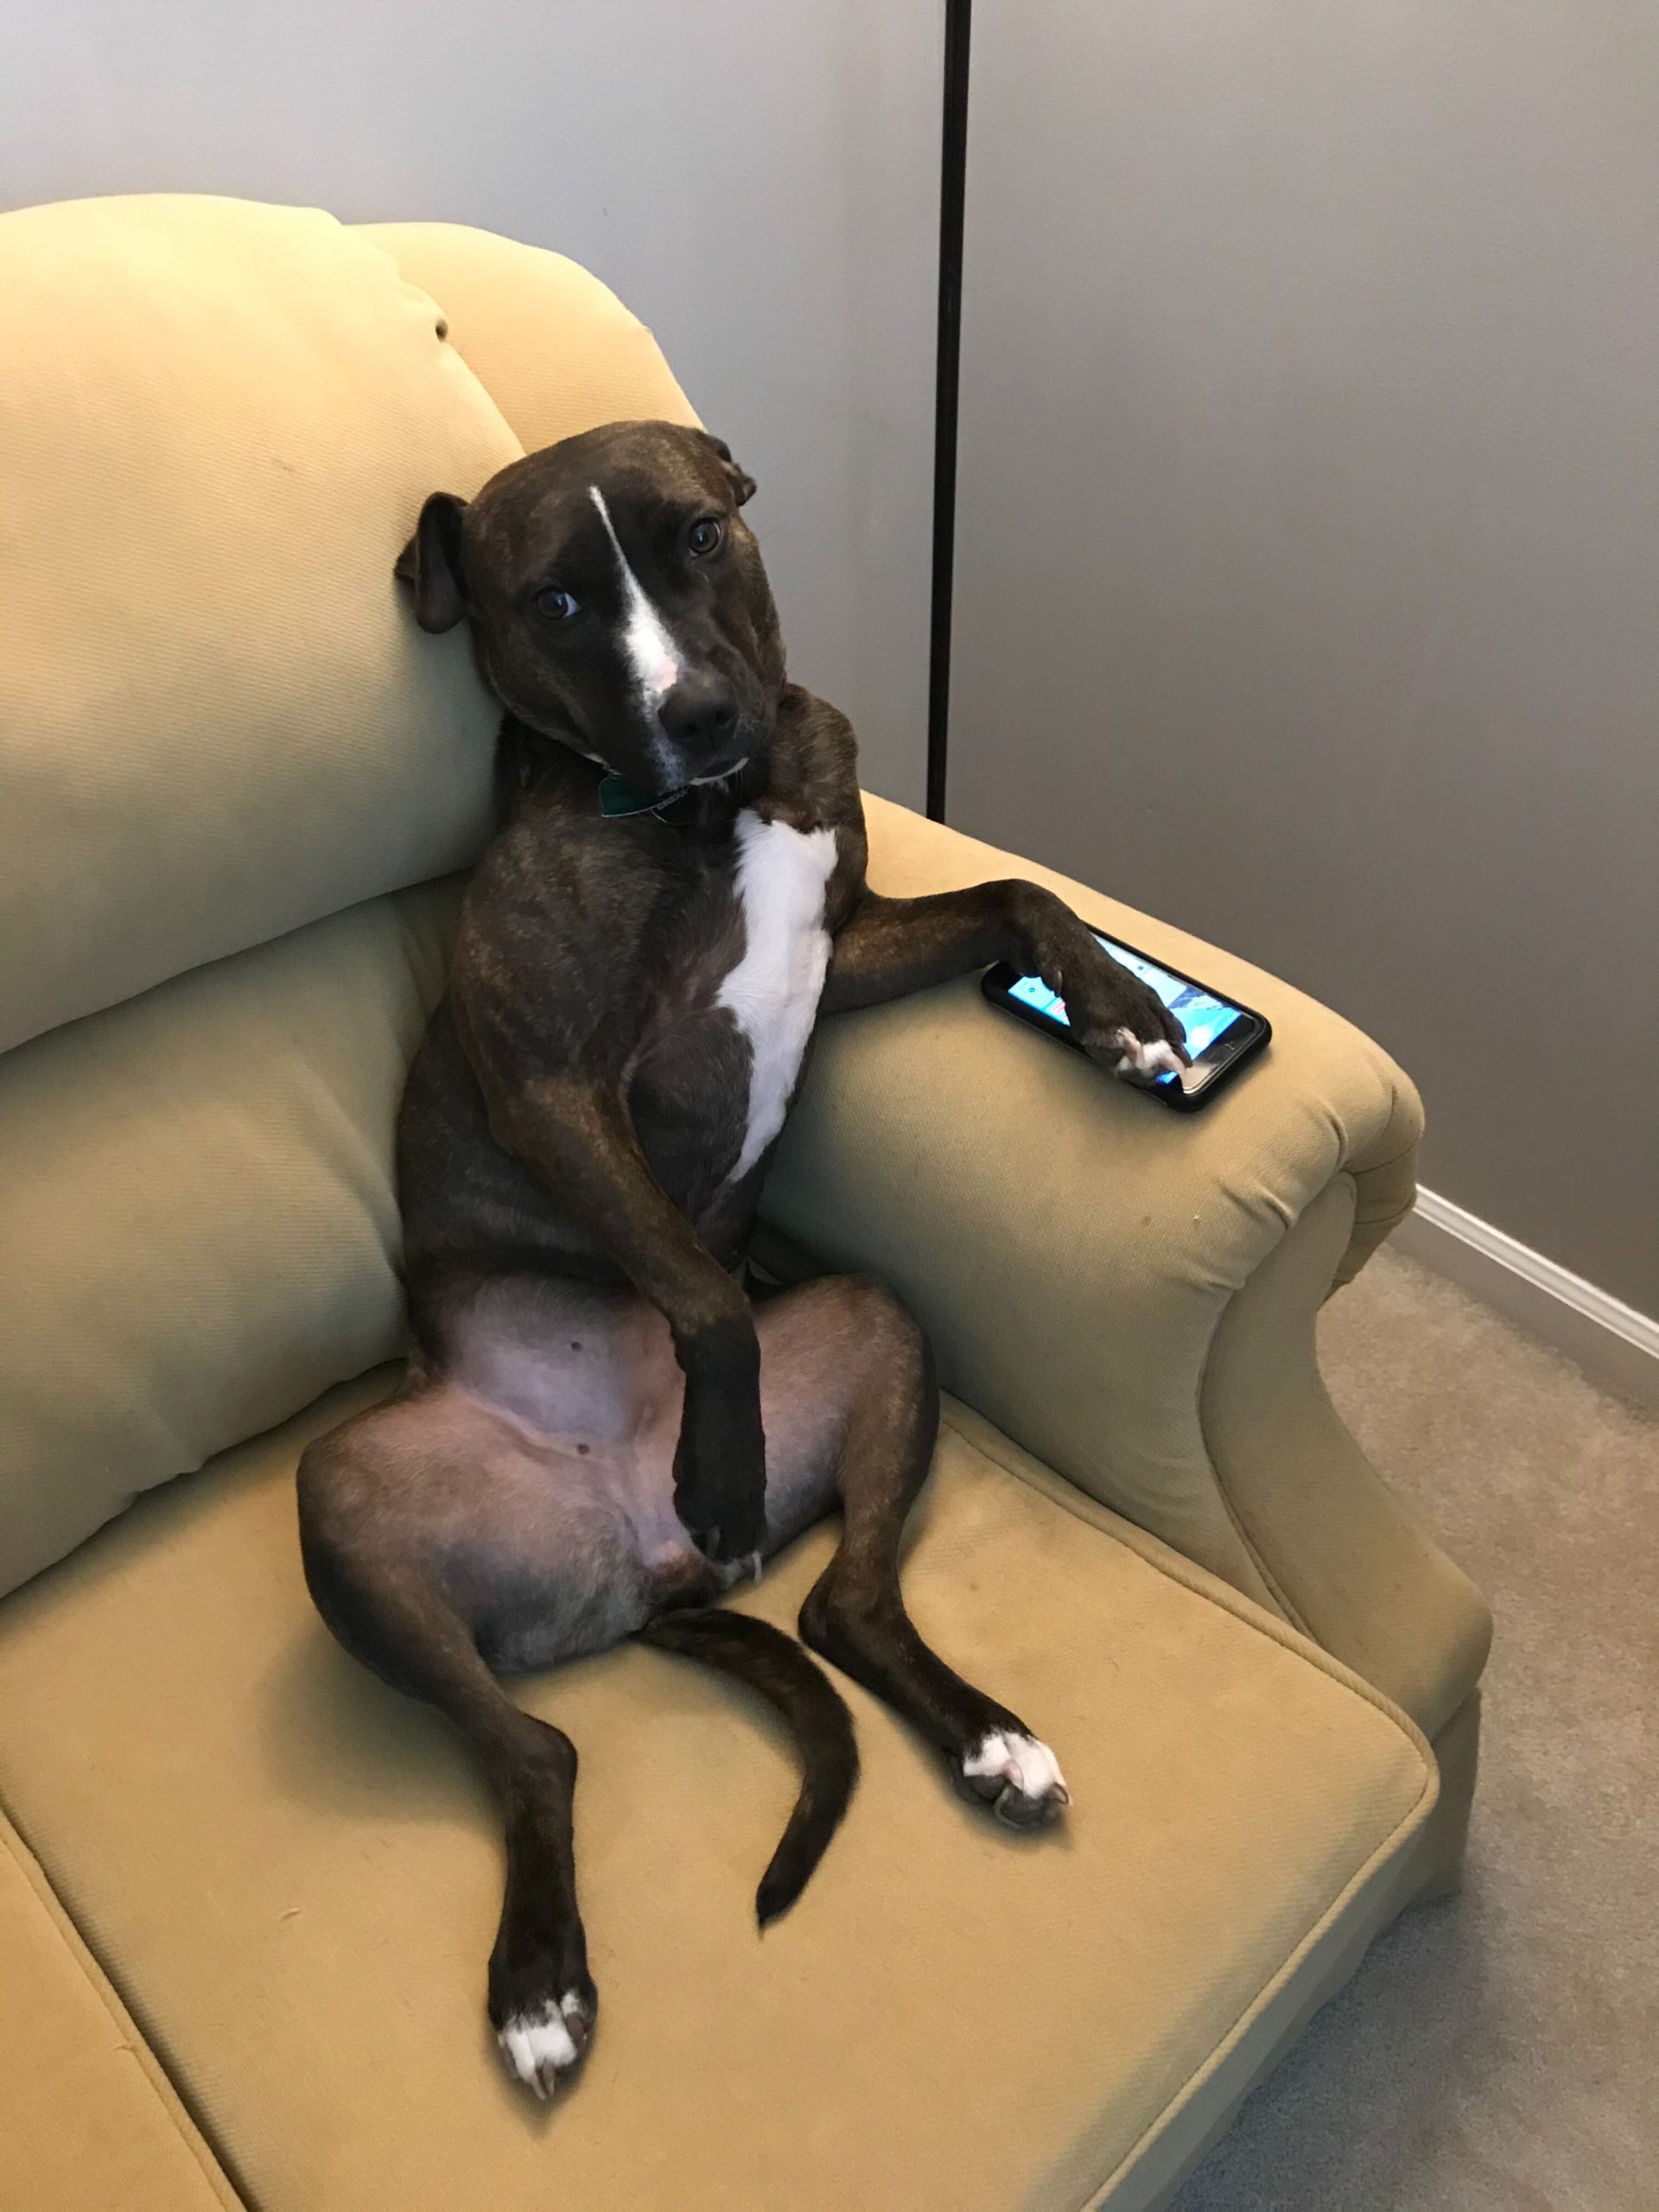 Dog sitting upright on a couch with paw on an iPhone